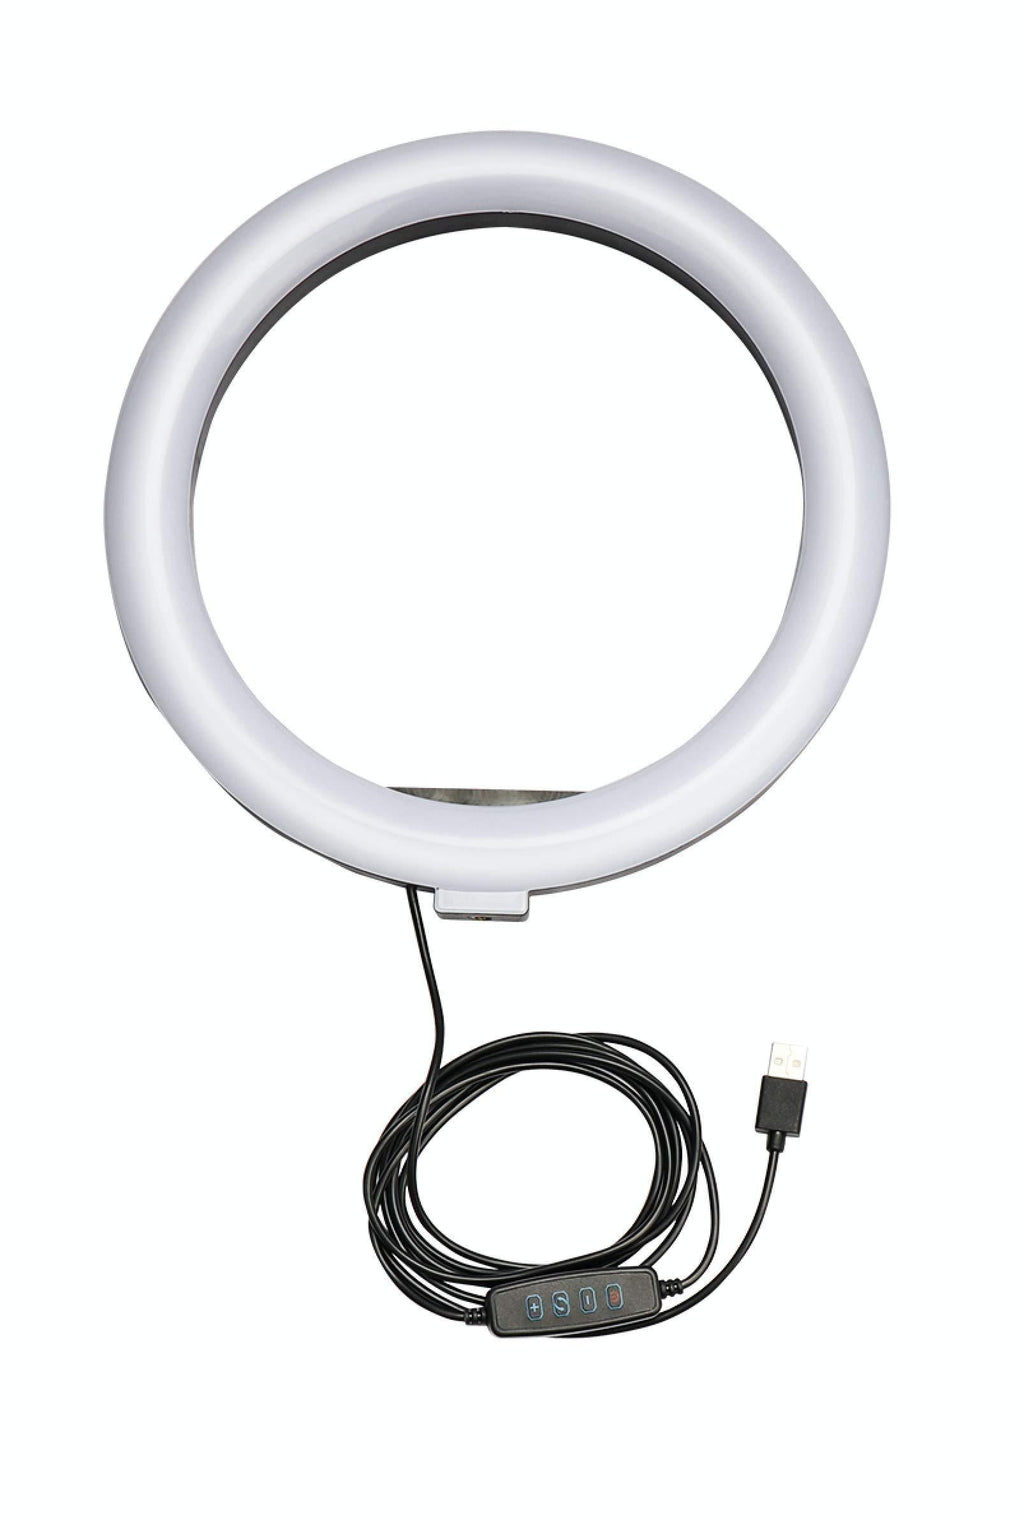 Ring Light 10 Inches - 3 Color Temperatures, 10 Brightness Levels, LED Lighting for Social Media/TikTok/Instagram/Facebook/Streaming/YouTube/Photography/Makeup